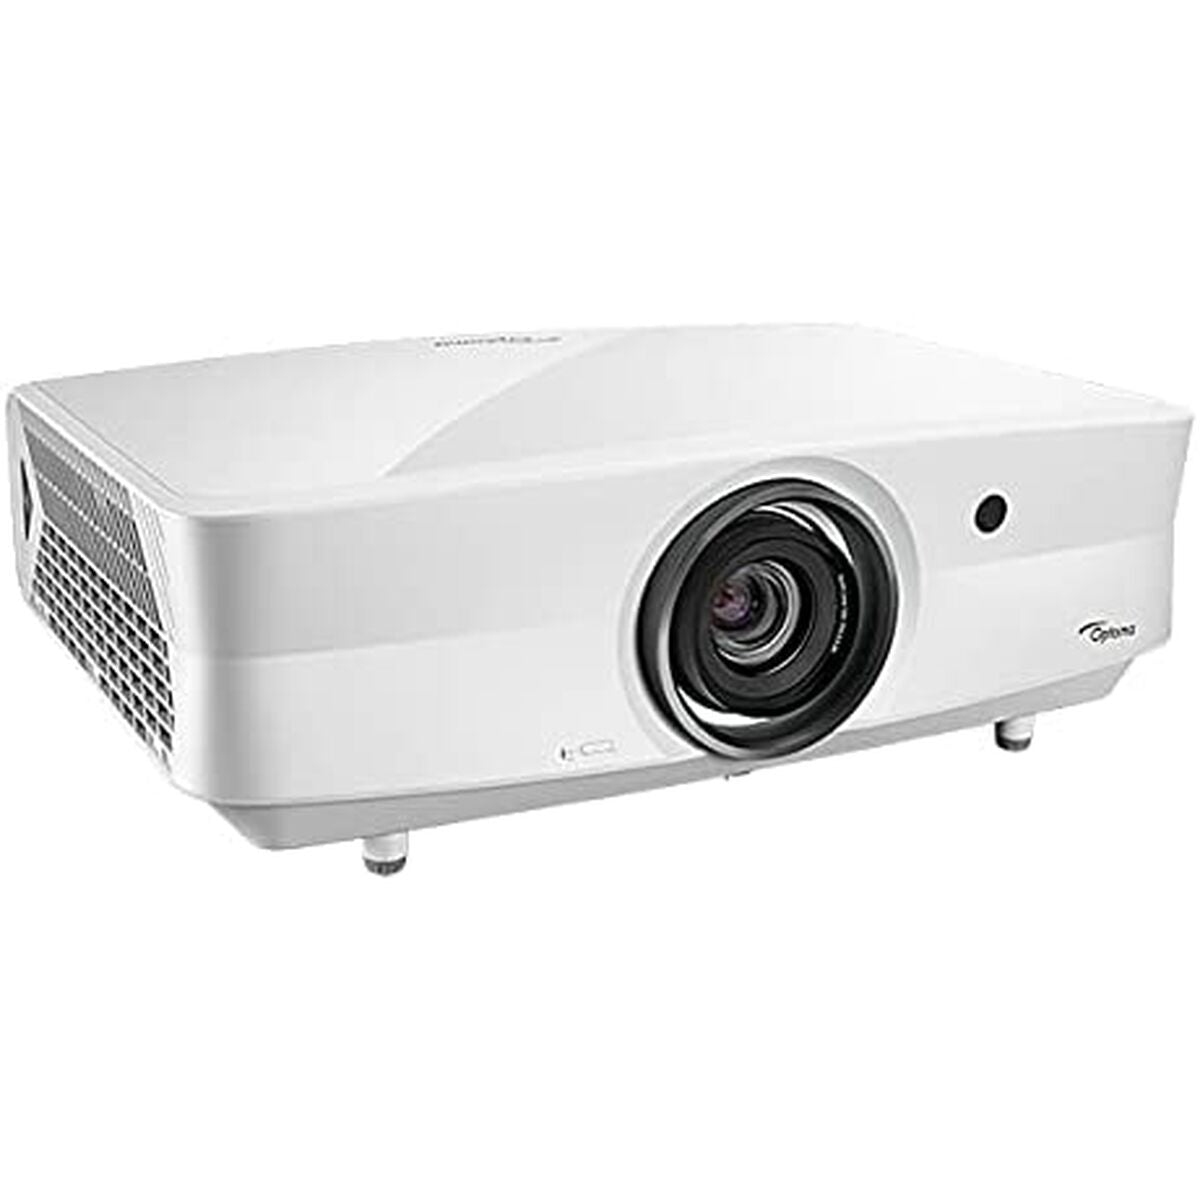 Projector Optoma UHZ65LV 5000 Lm, Optoma, Electronics, TV, Video and home cinema, projector-optoma-uhz65lv-5000-lm, Brand_Optoma, category-reference-2609, category-reference-2642, category-reference-2947, category-reference-t-18805, category-reference-t-19653, cinema and television, computers / peripherals, Condition_NEW, entertainment, office, Price_+ 1000, RiotNook